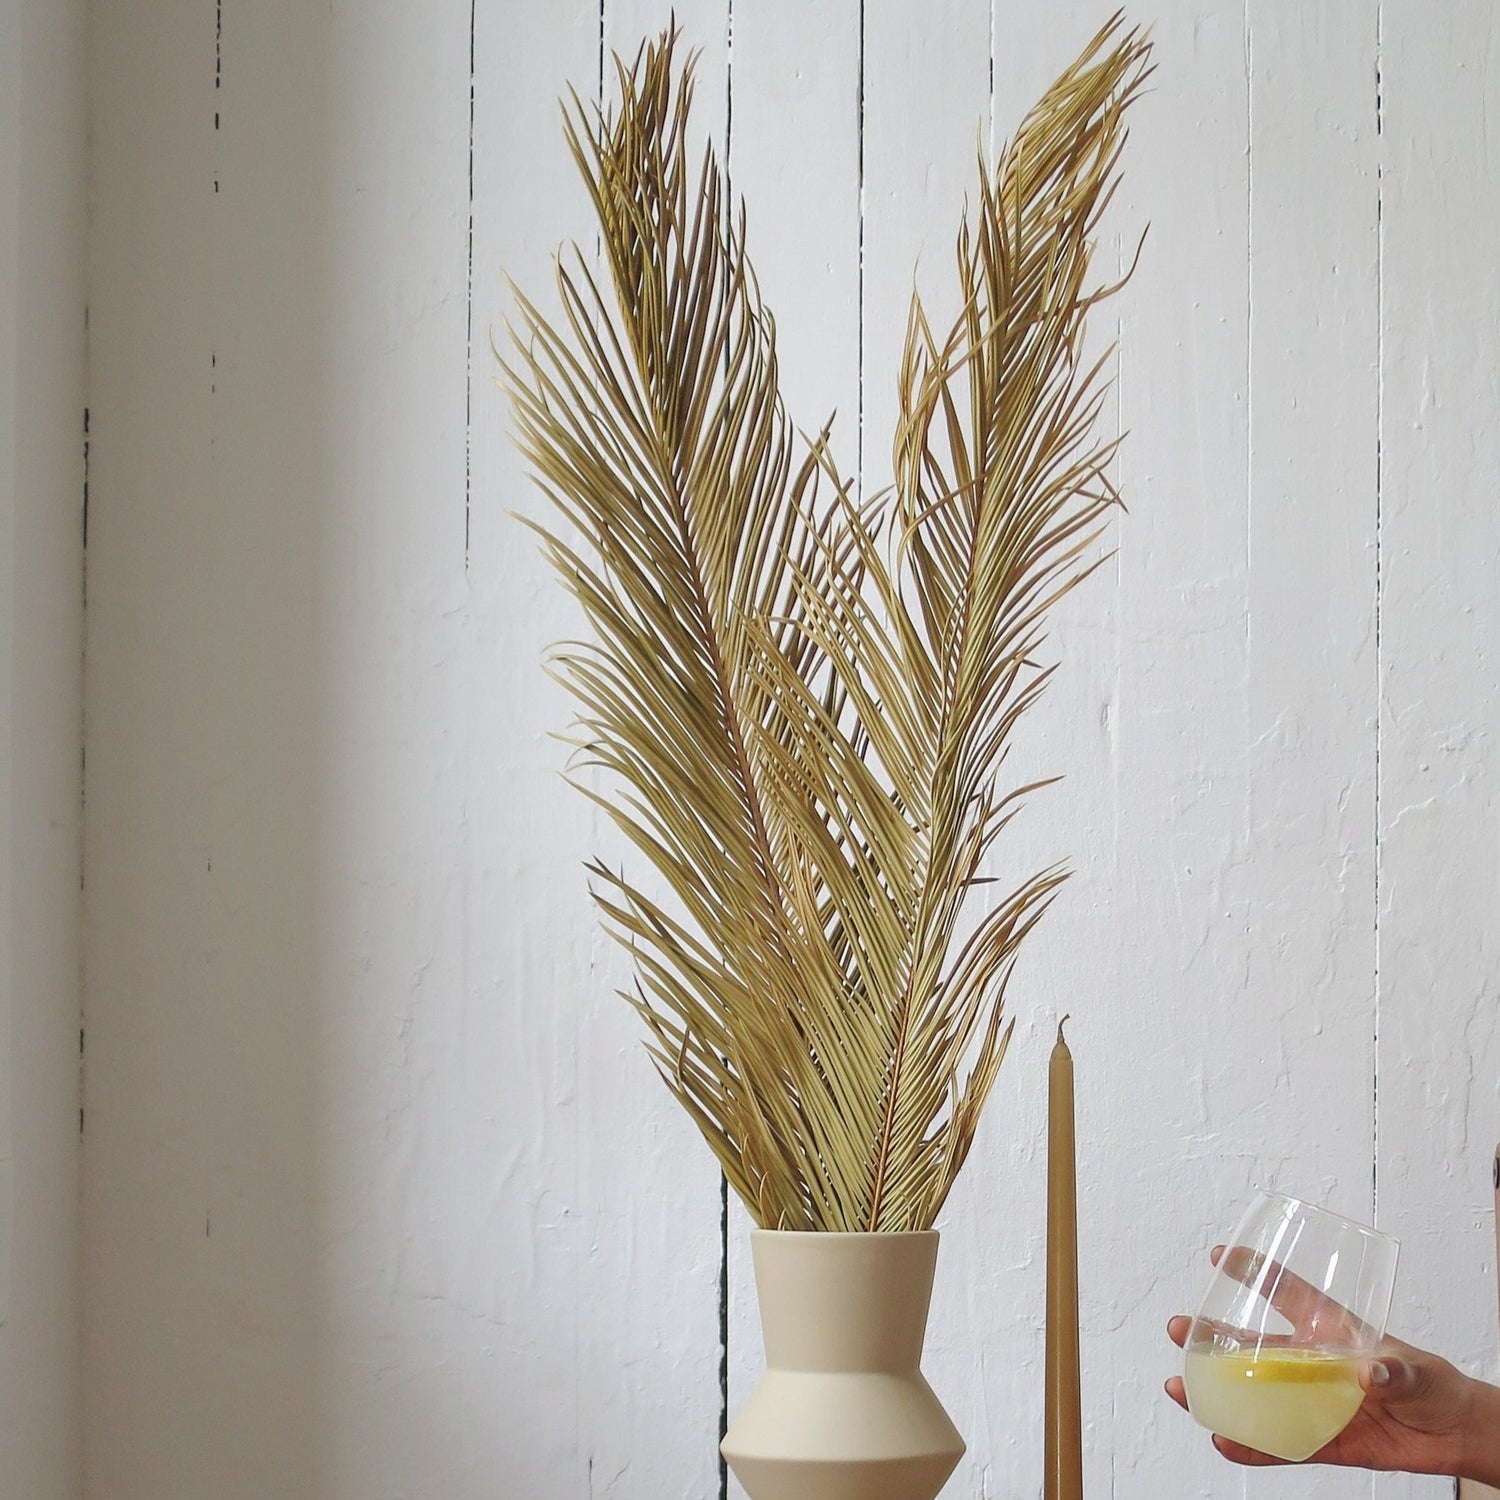 Dried sago palm leaf available at Rook and Rose.